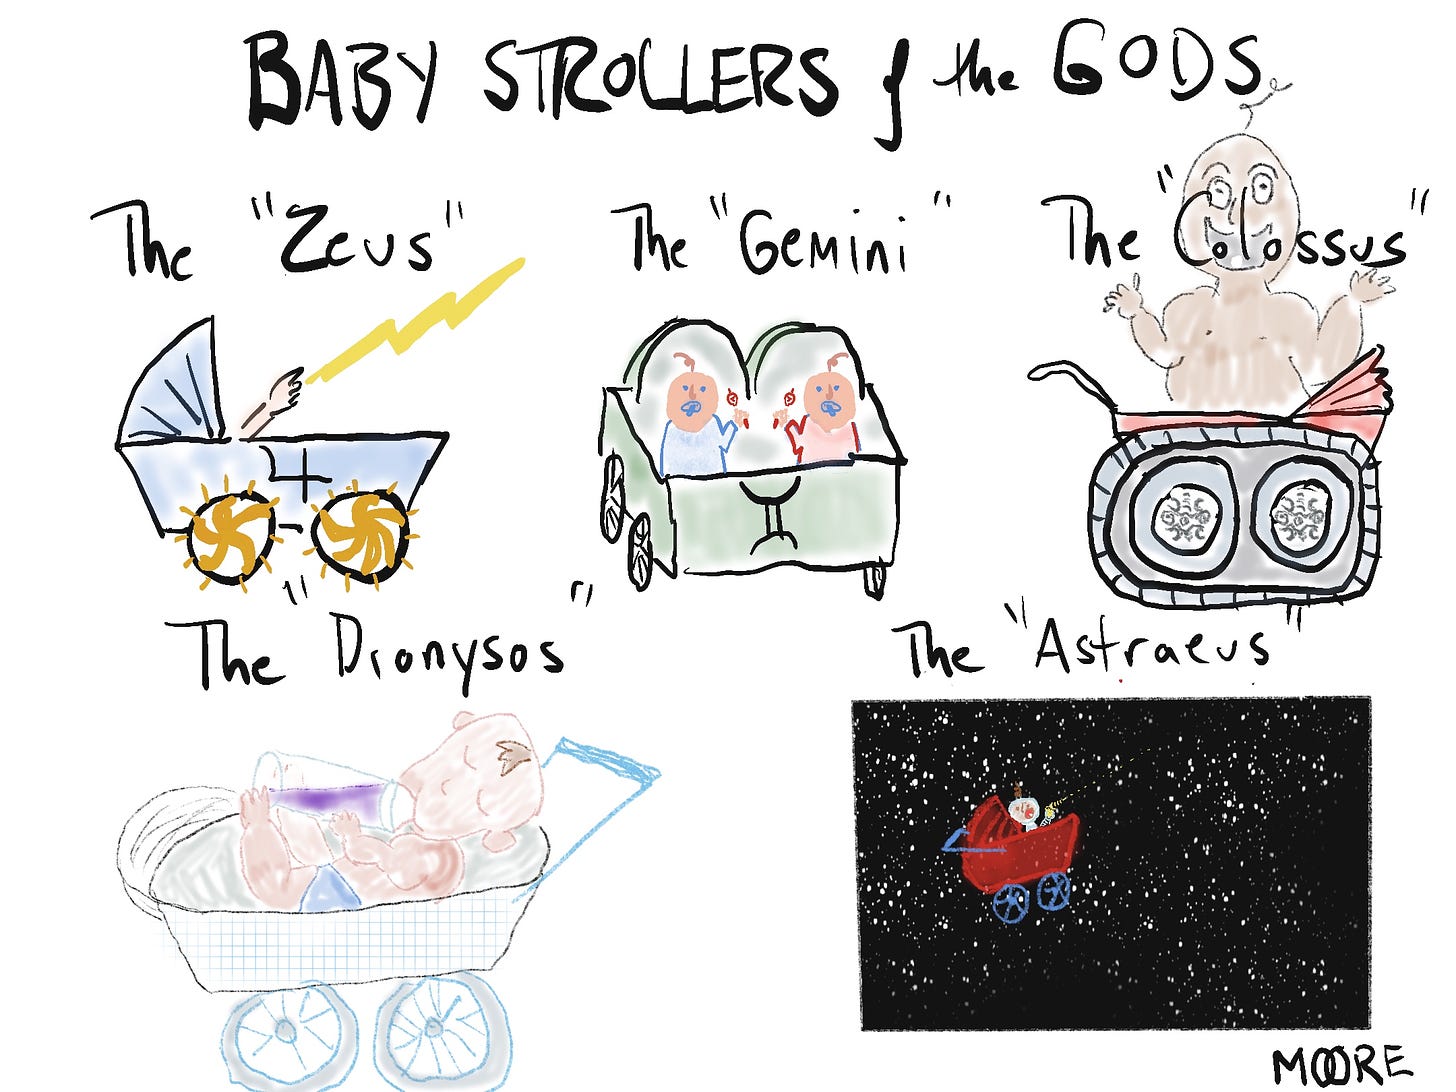 Baby strollers of the gods